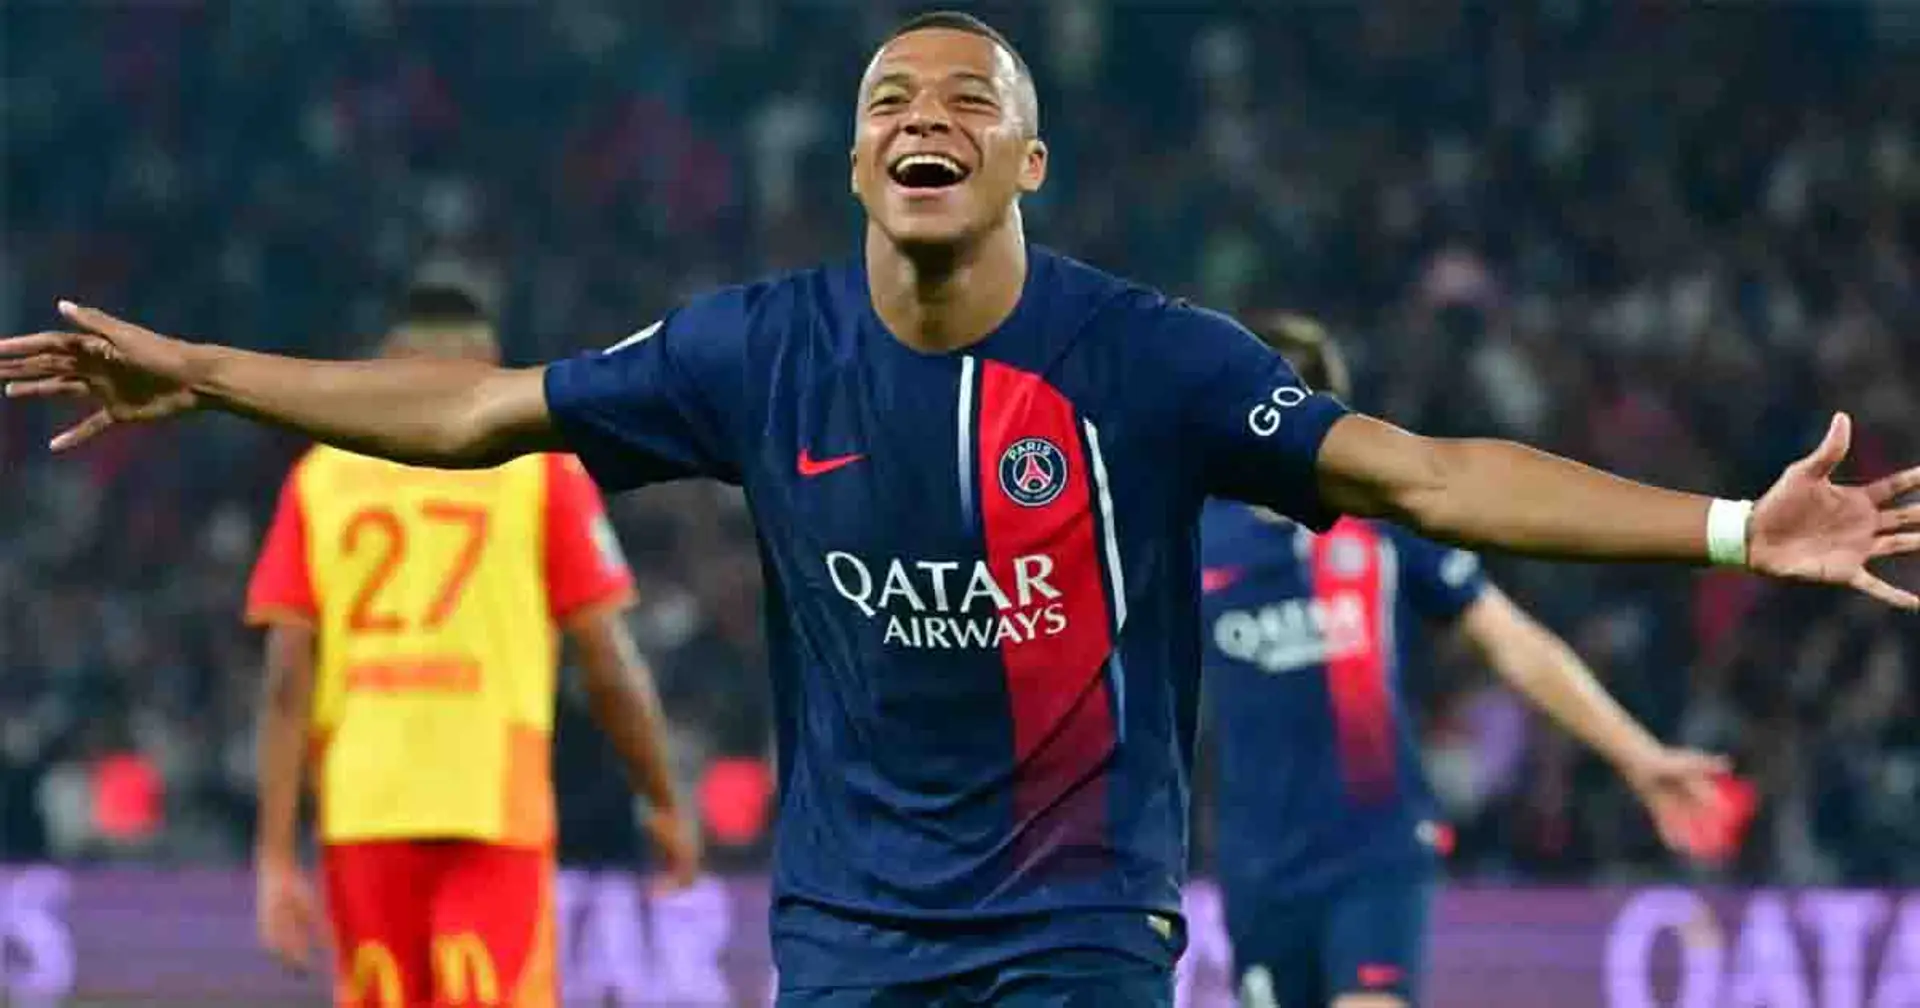 The Athletic: Mbappe 'closer than before' to signing new PSG contract